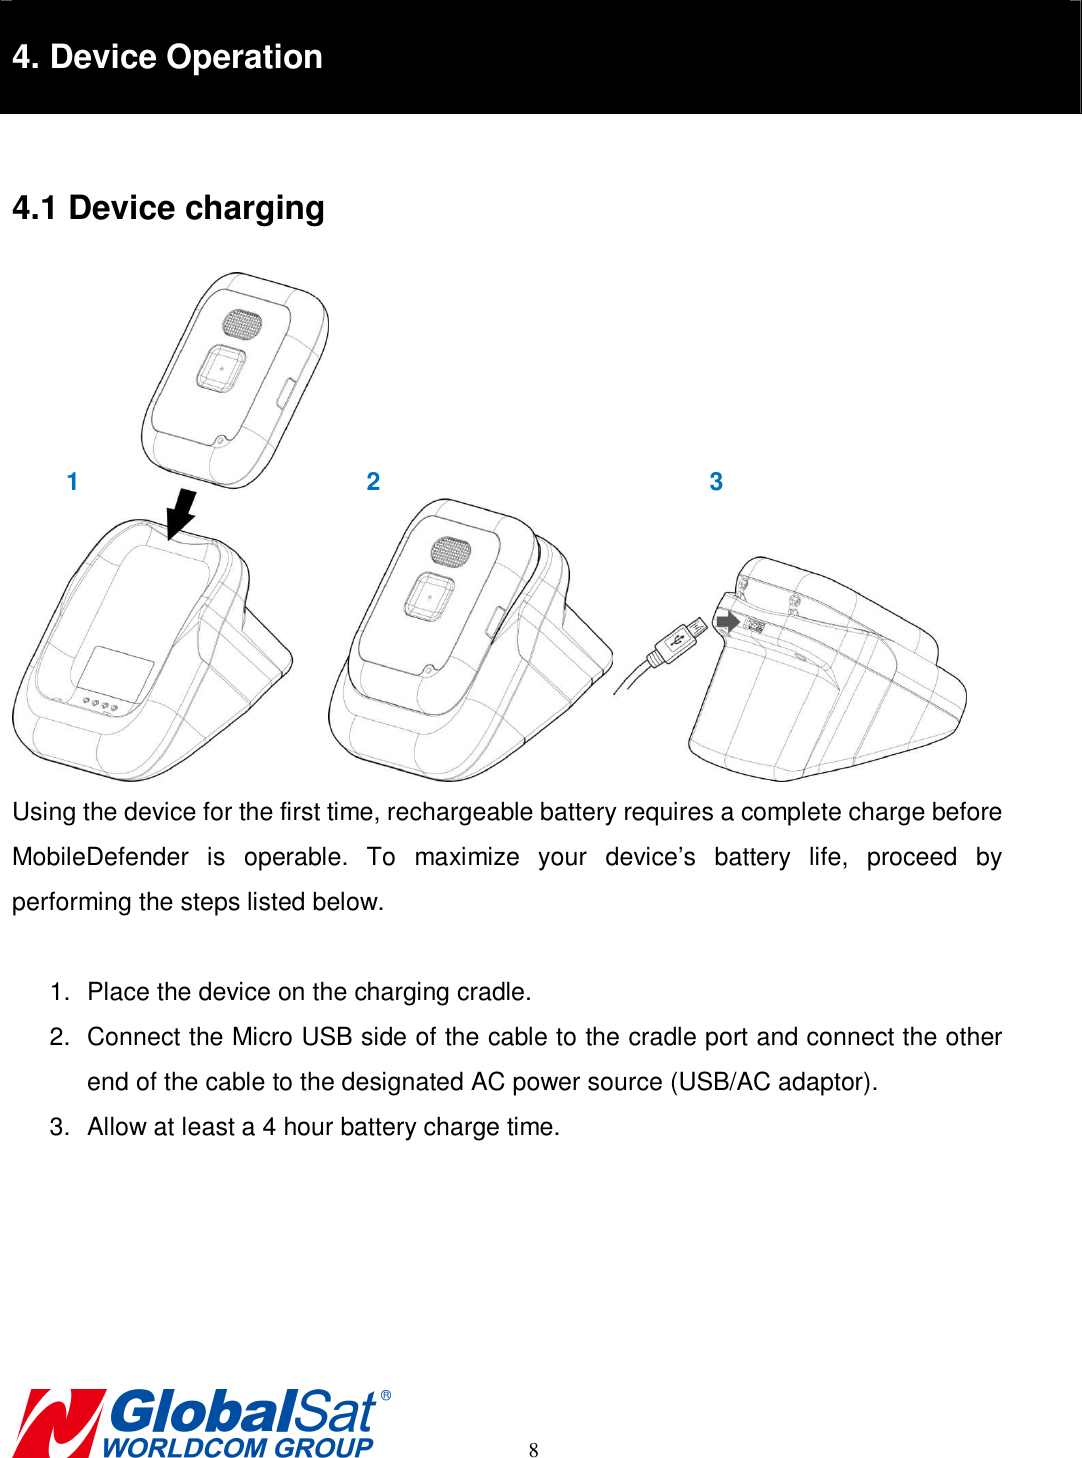                                                                                     8  4. Device Operation  4.1 Device charging  Using the device for the first time, rechargeable battery requires a complete charge before MobileDefender  is  operable.  To  maximize  your  device’s  battery  life,  proceed  by performing the steps listed below.  1.  Place the device on the charging cradle.   2.  Connect the Micro USB side of the cable to the cradle port and connect the other end of the cable to the designated AC power source (USB/AC adaptor). 3.  Allow at least a 4 hour battery charge time.       1  2  3 